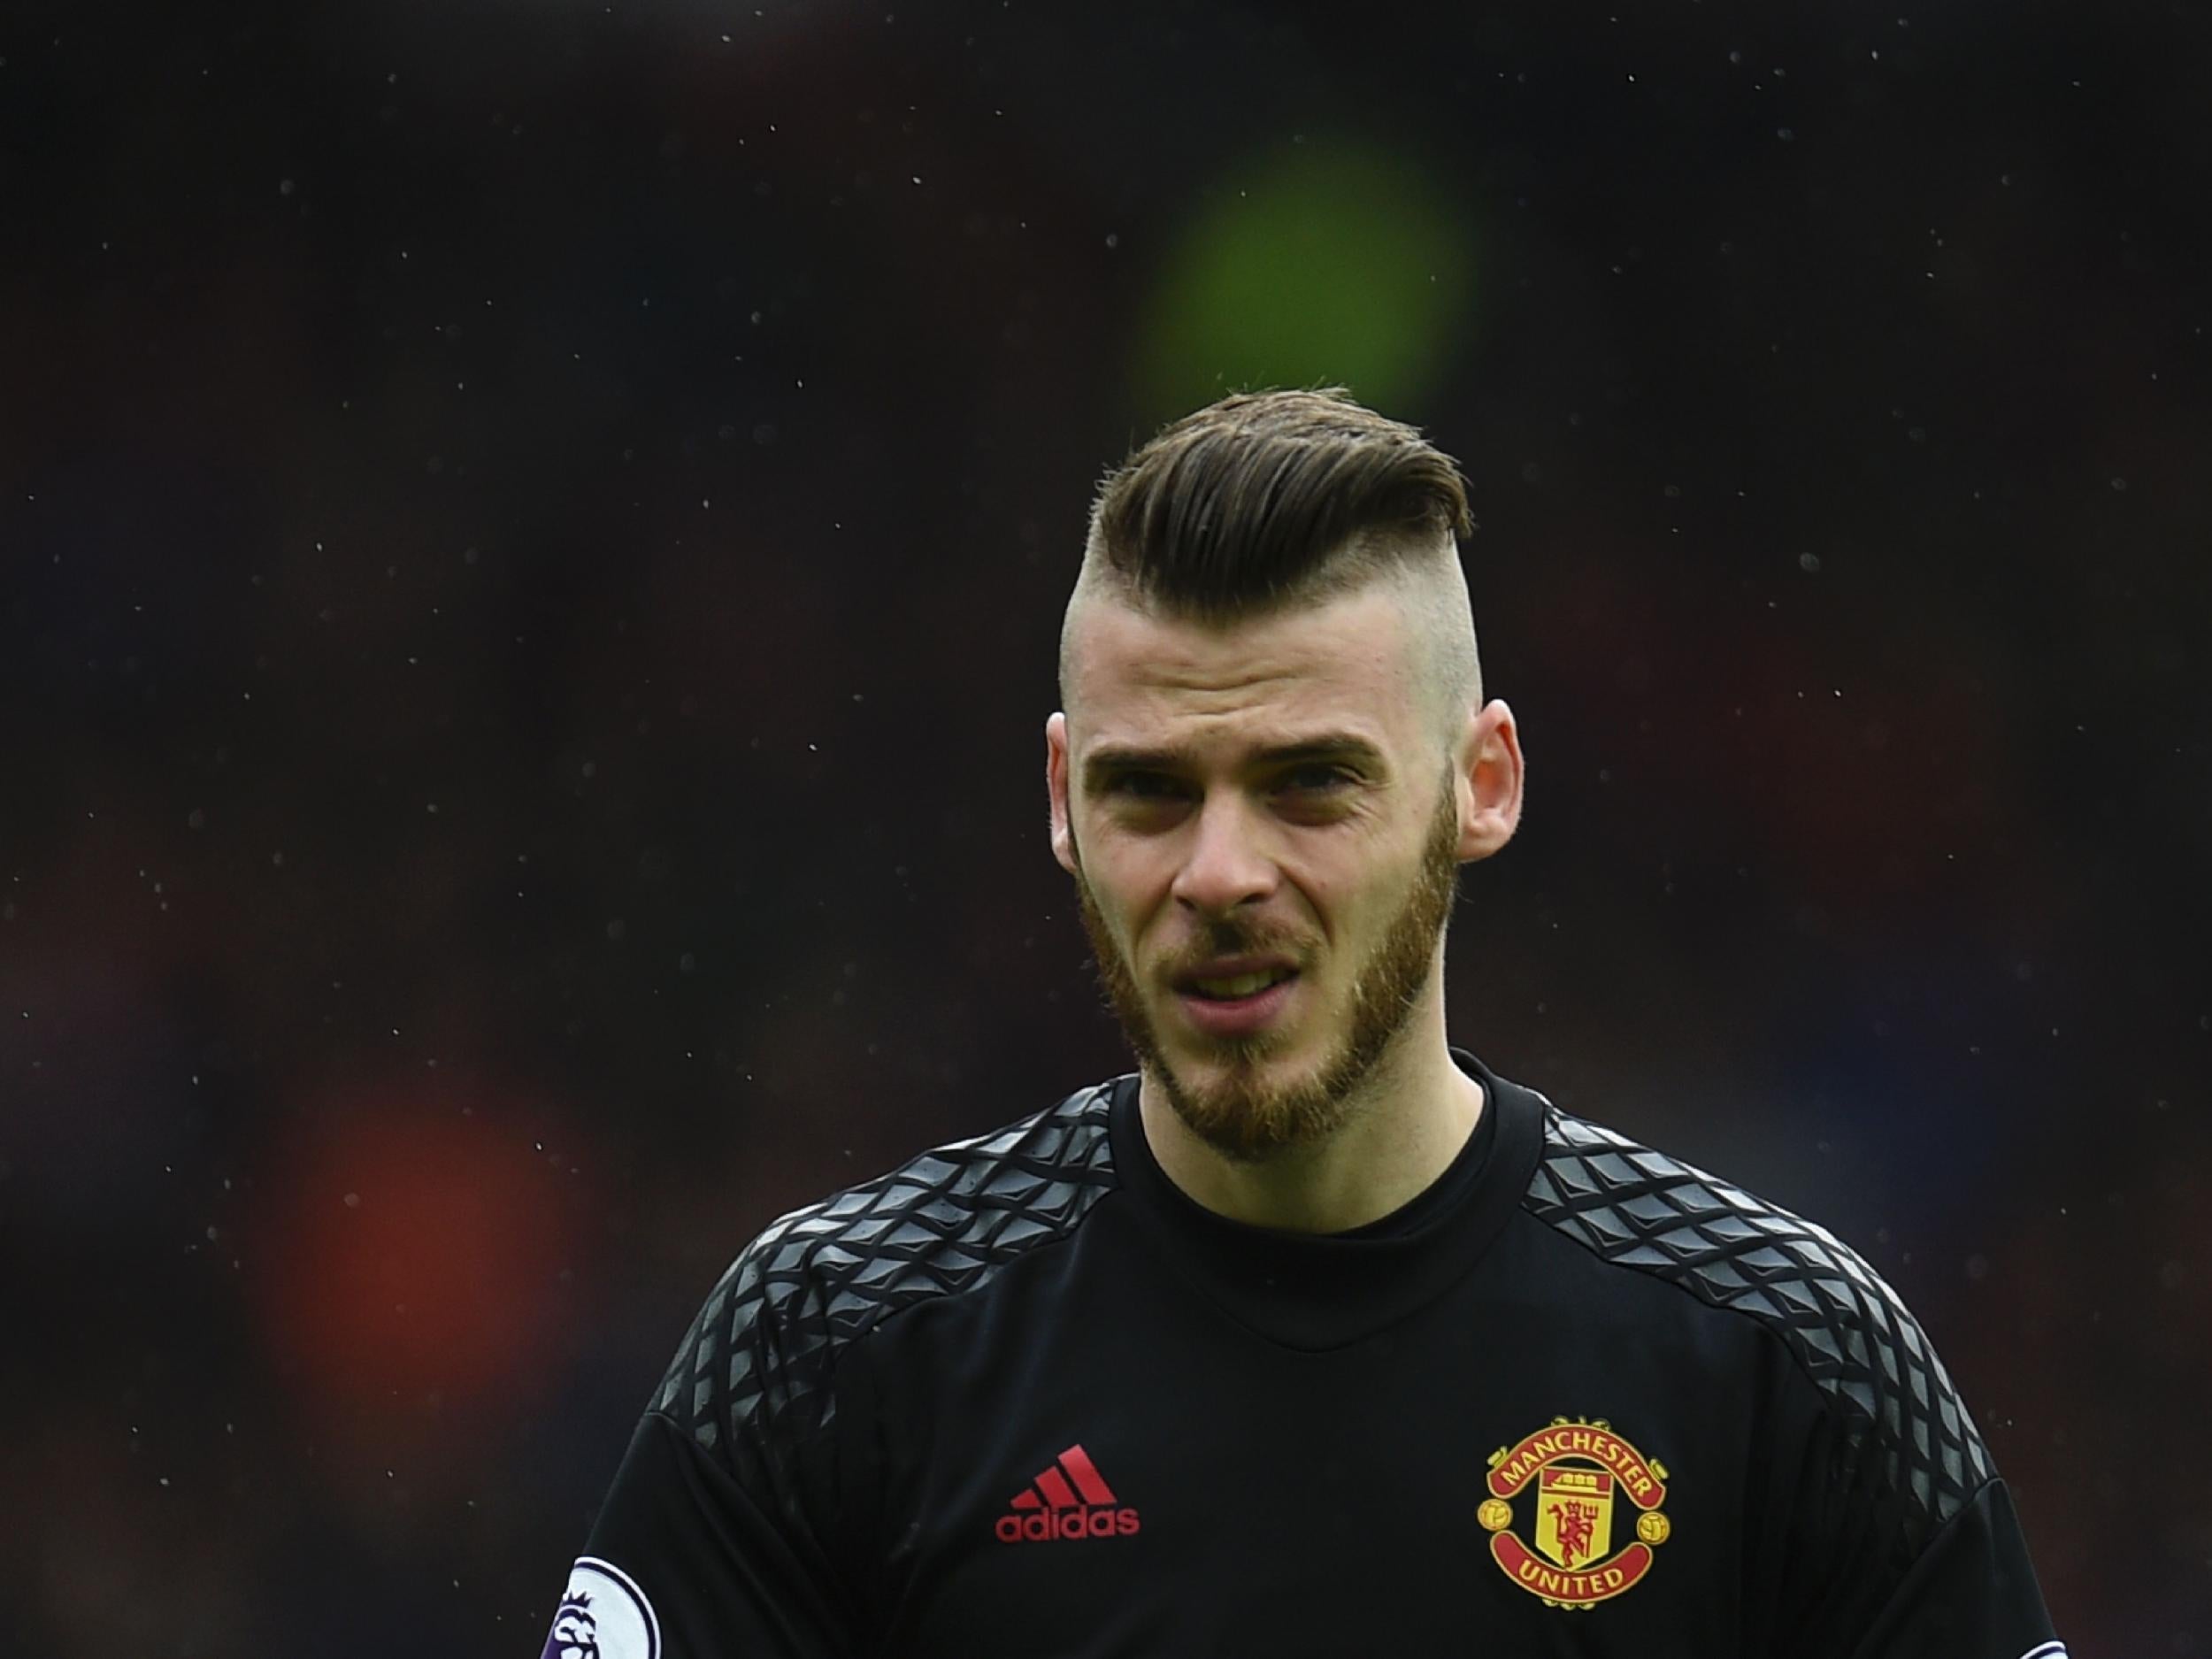 De Gea was on the verge of signing for Madrid in 2015 but their interest now appears over